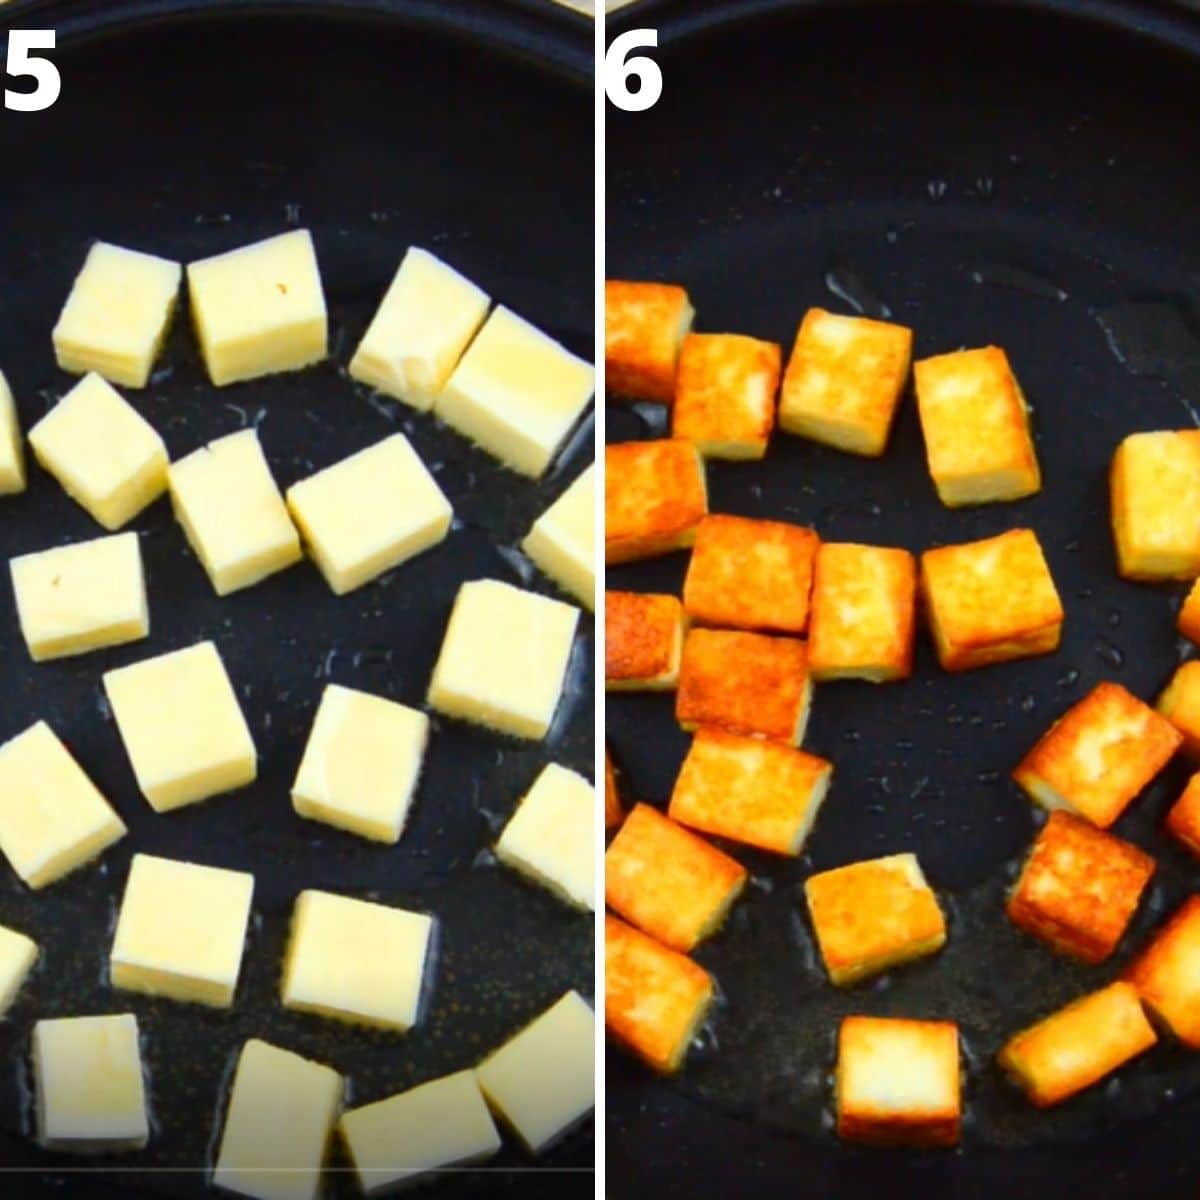 college of 2 images wit left showing fresh paneer in a frying pan and right side image of fried paneer in a frying pan.